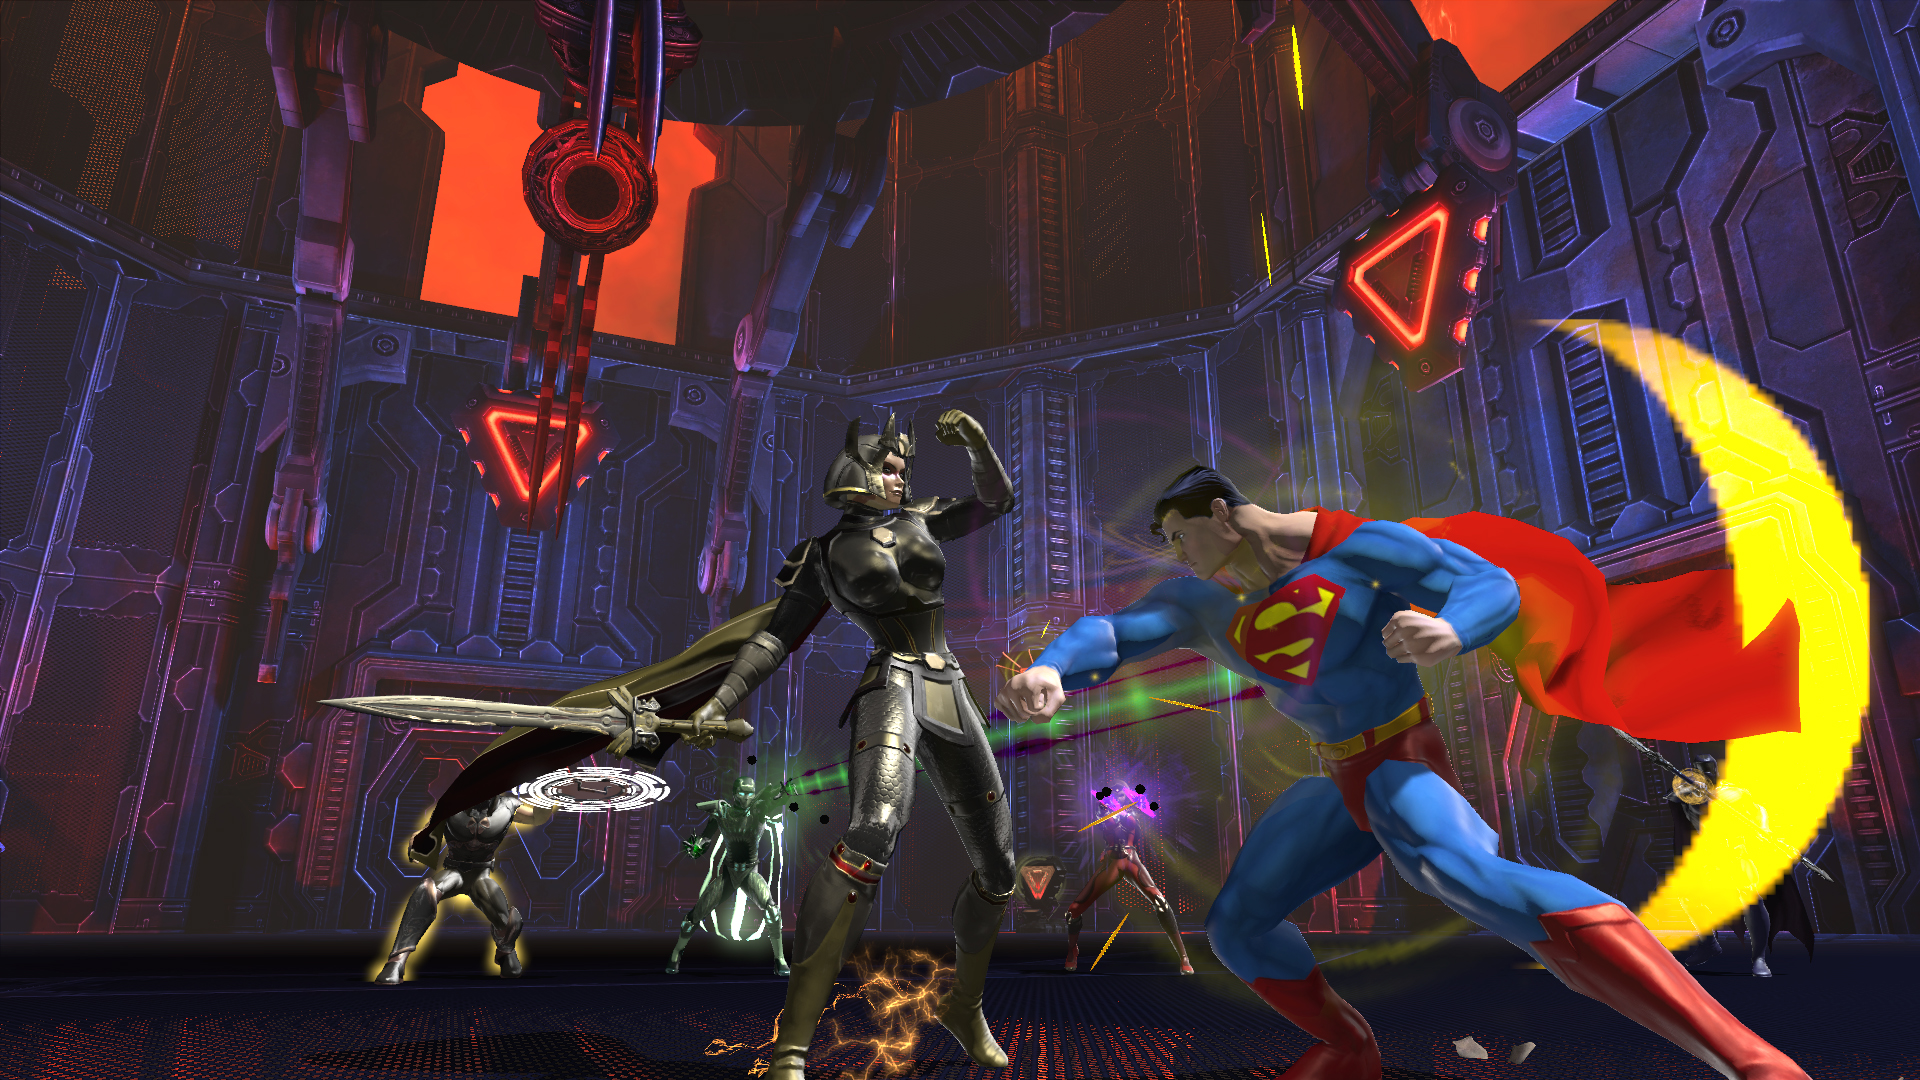 DC Universe Online - Ultimate Edition (2016) DLC Steam Gift